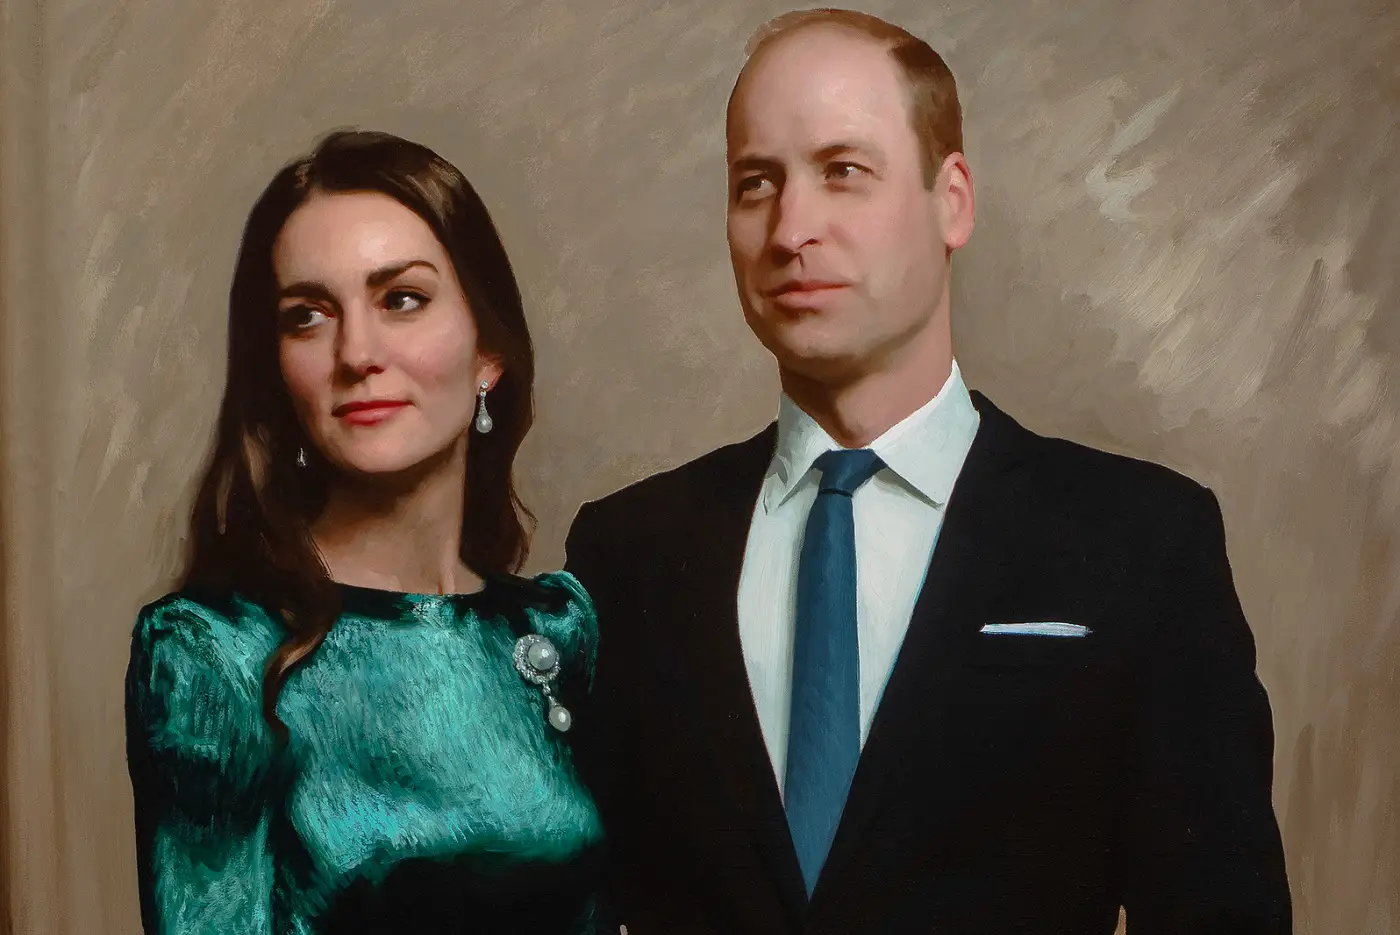 The Cambridge museum released a beautiful portrait of The Duke and Duchess of Cambridge painted by Award-winning British Portrait artist, Jamie Coreth